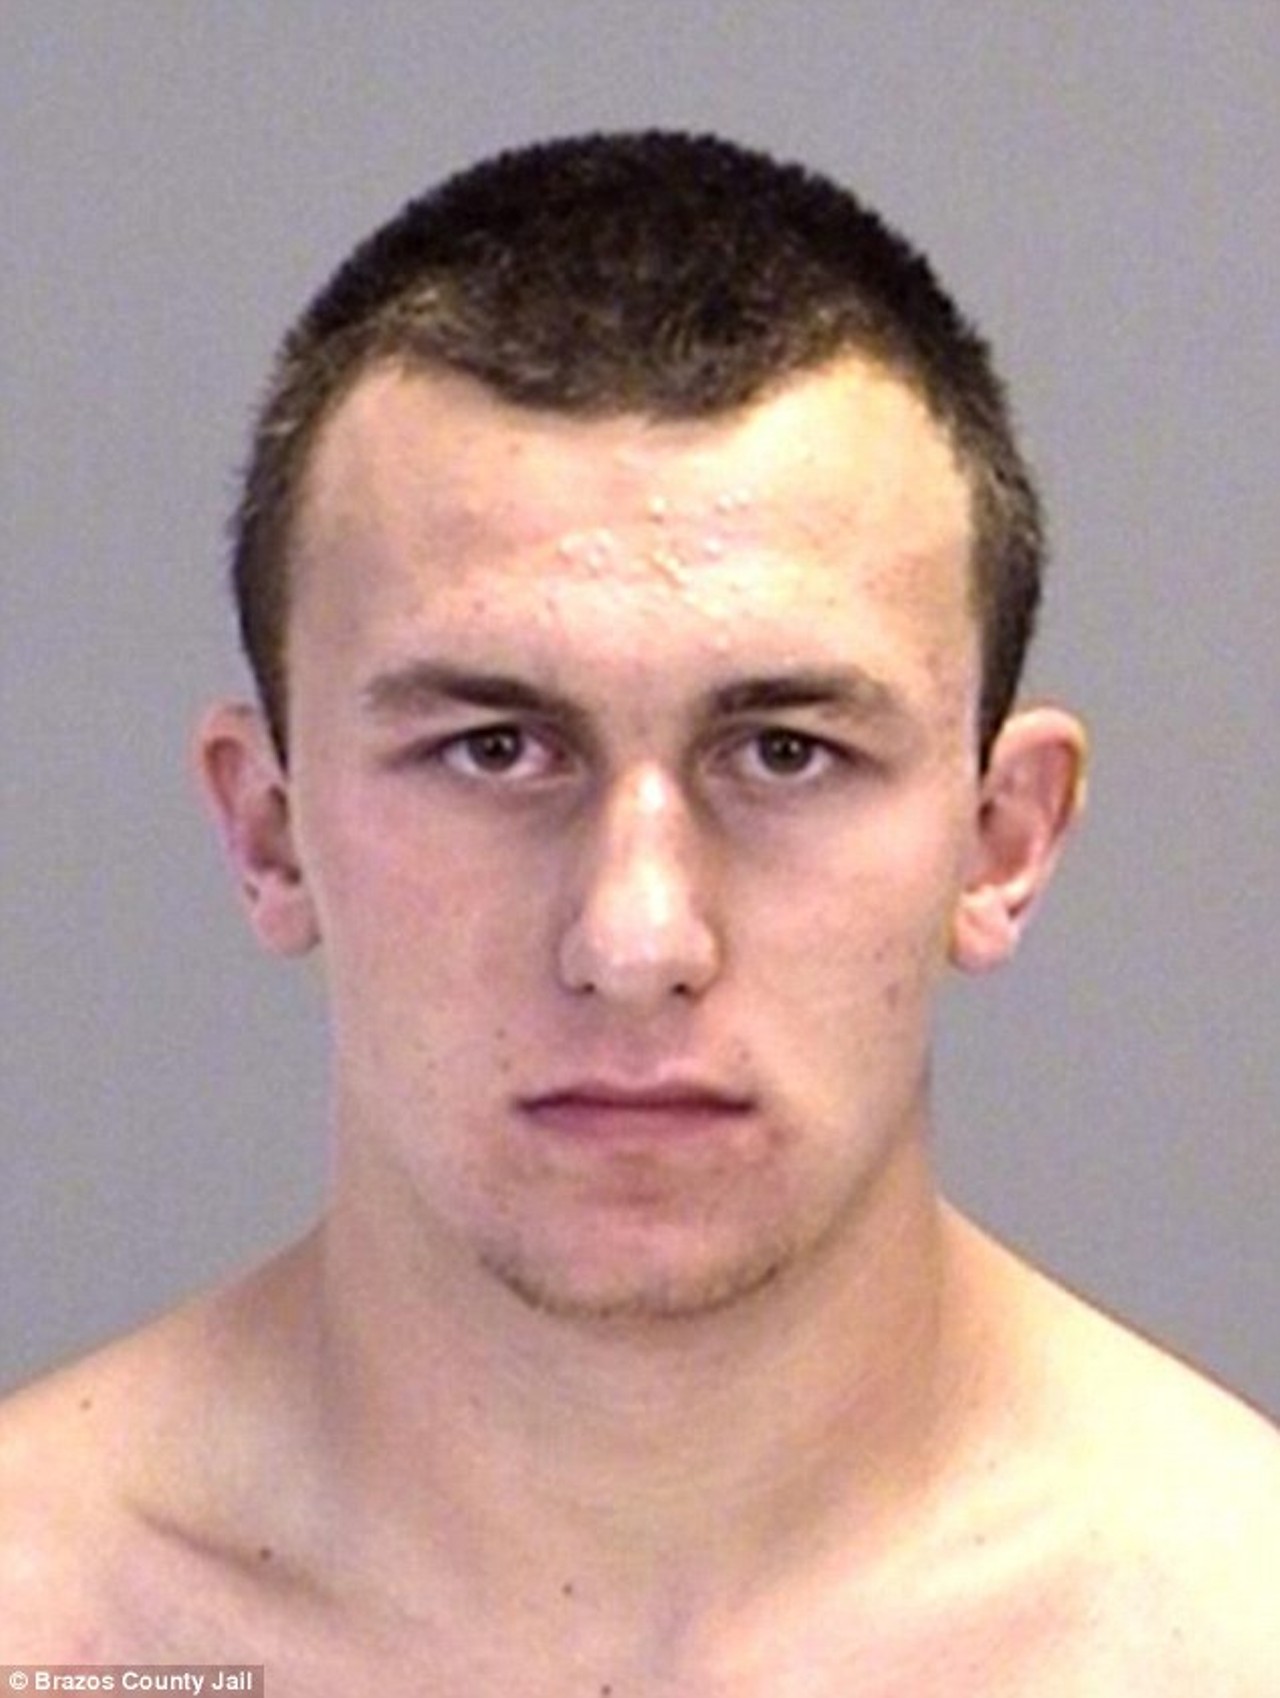 Johnny Manziel was indicted by a Dallas grand jury and arrested on a misdemeanor assault charge in April 2016. He could get up to a year in jail and/or a $4,000 fine. The charge stems from an incident with his ex-girlfriend, Colleen Crowley back in January. He's accused of hitting her and causing long-term damage to her eardrum. His Cleveland connected? Johnny Manziel (aka, Johnny Football) fell from grace as the Cleveland Browns first round pick and starting quarterback.